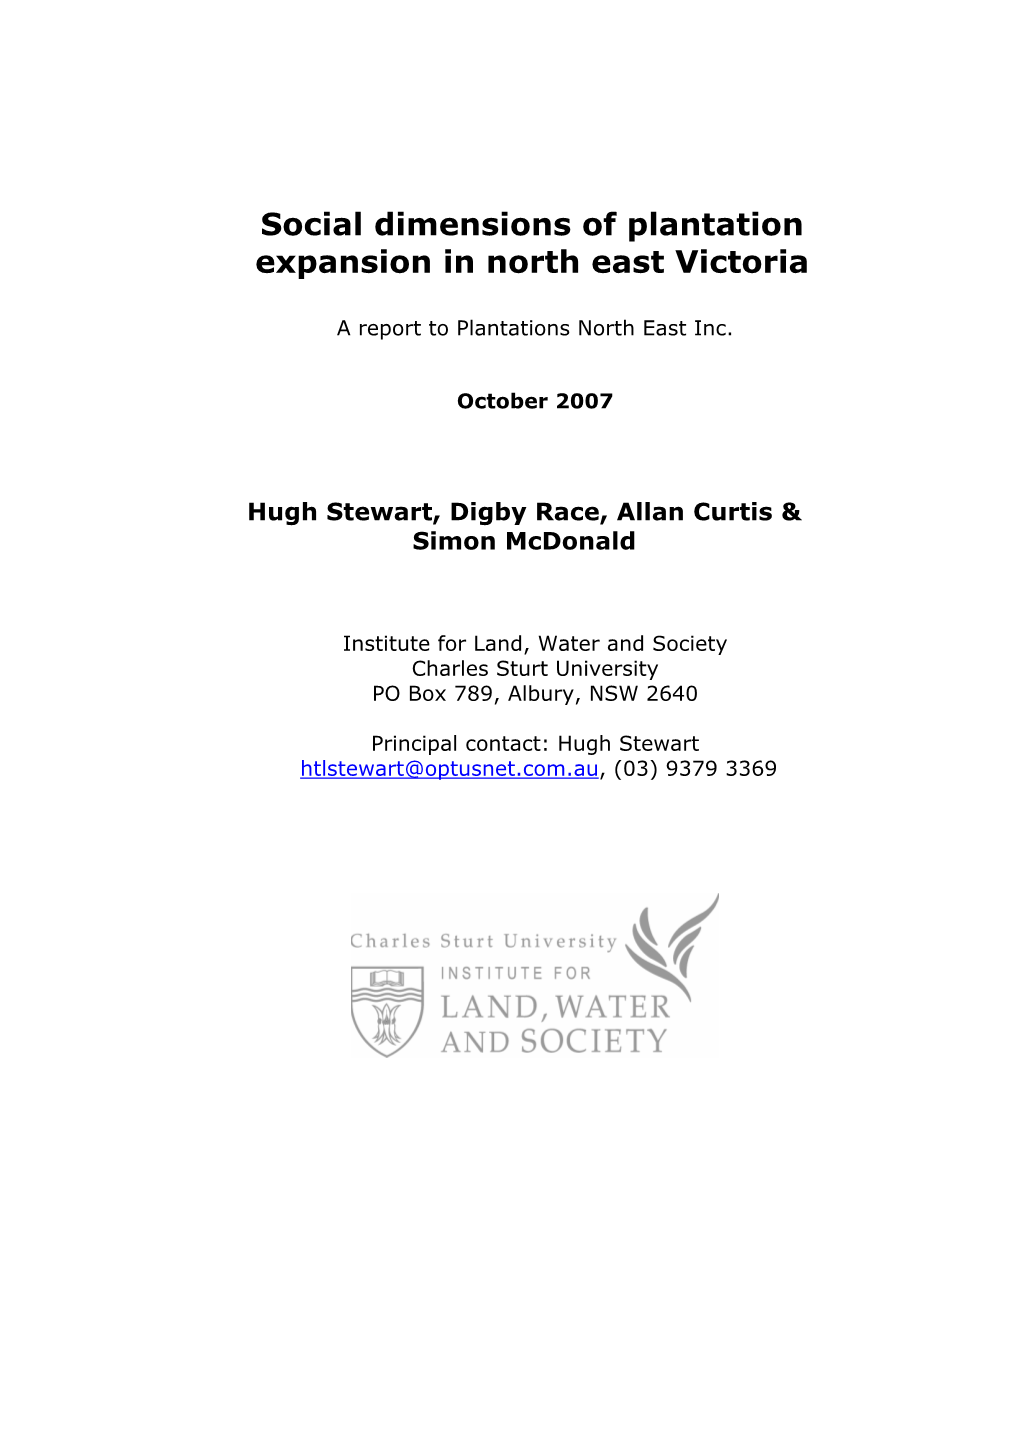 Social Dimensions of Plantation Expansion in North East Victoria